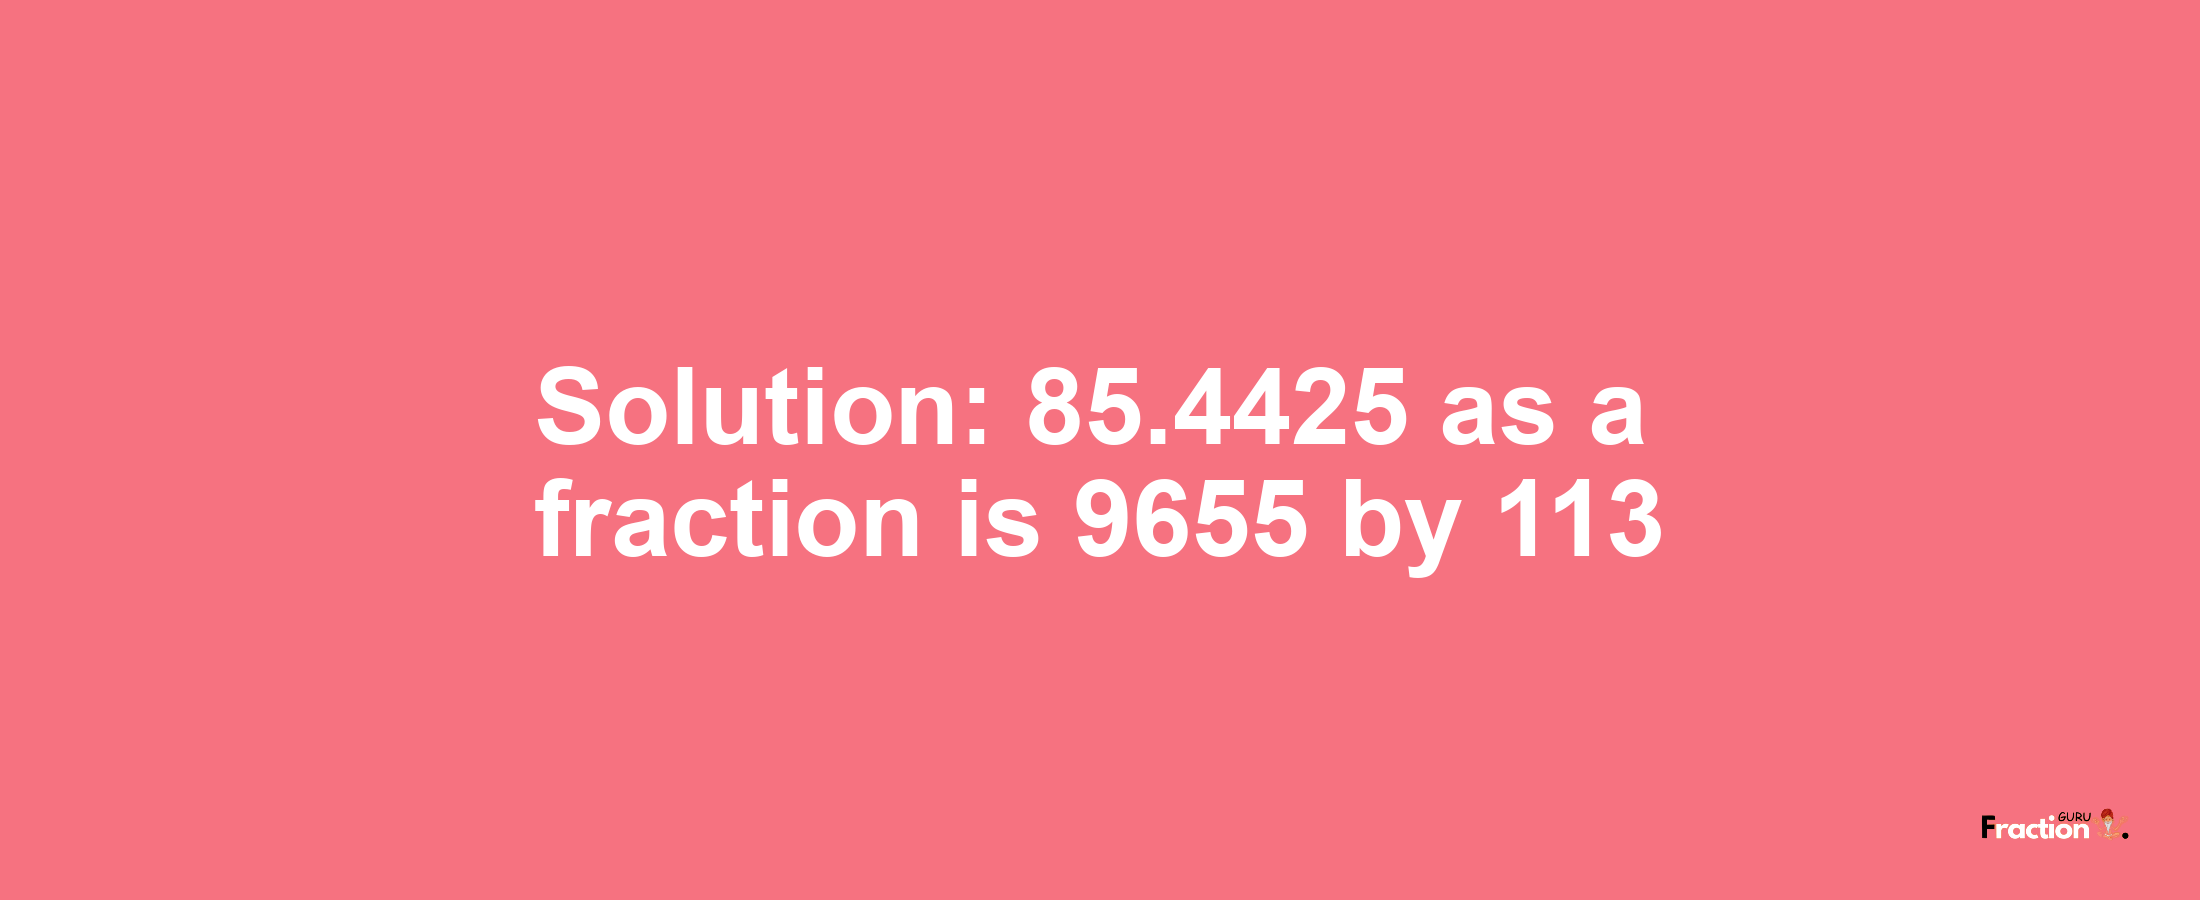 Solution:85.4425 as a fraction is 9655/113